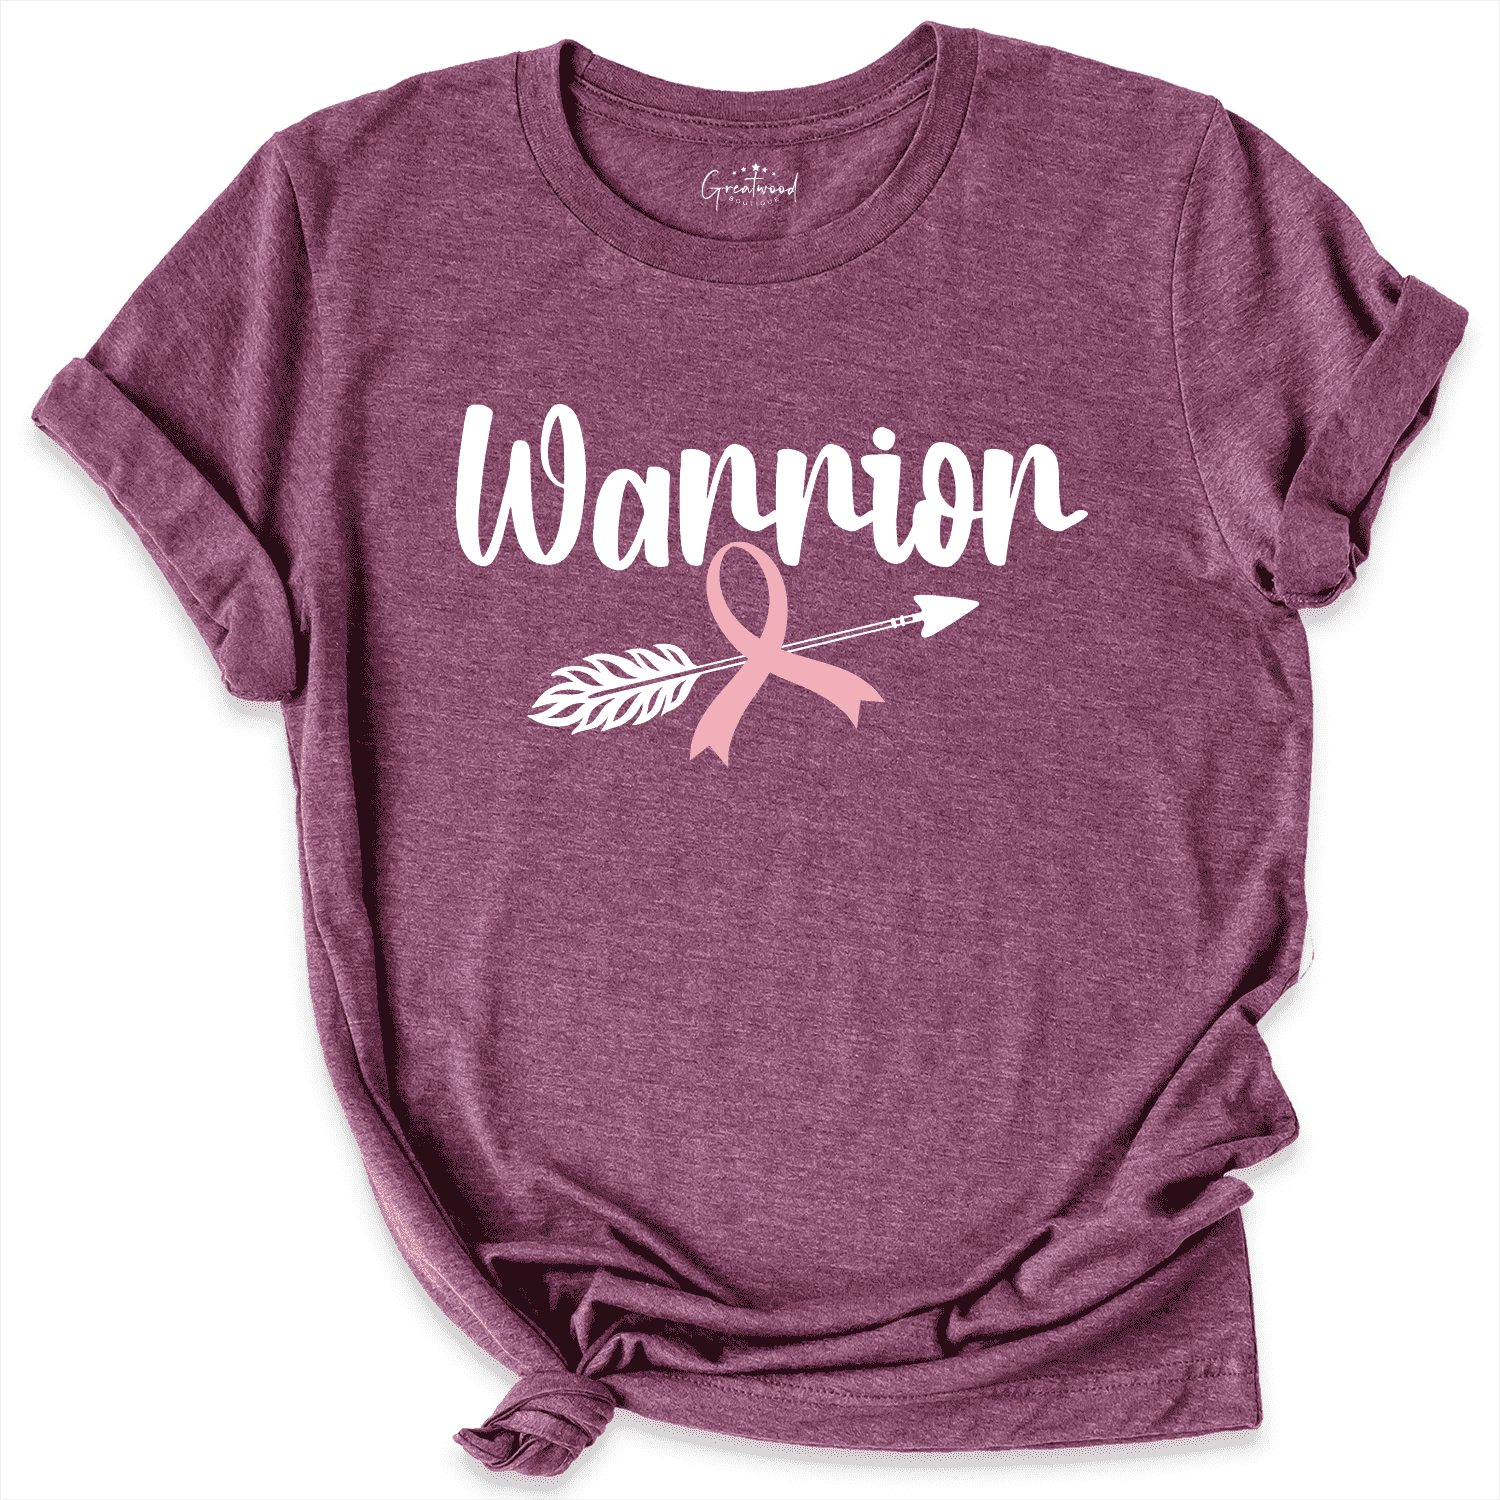 Warrior Shirt Maroon - Greatwood Boutique